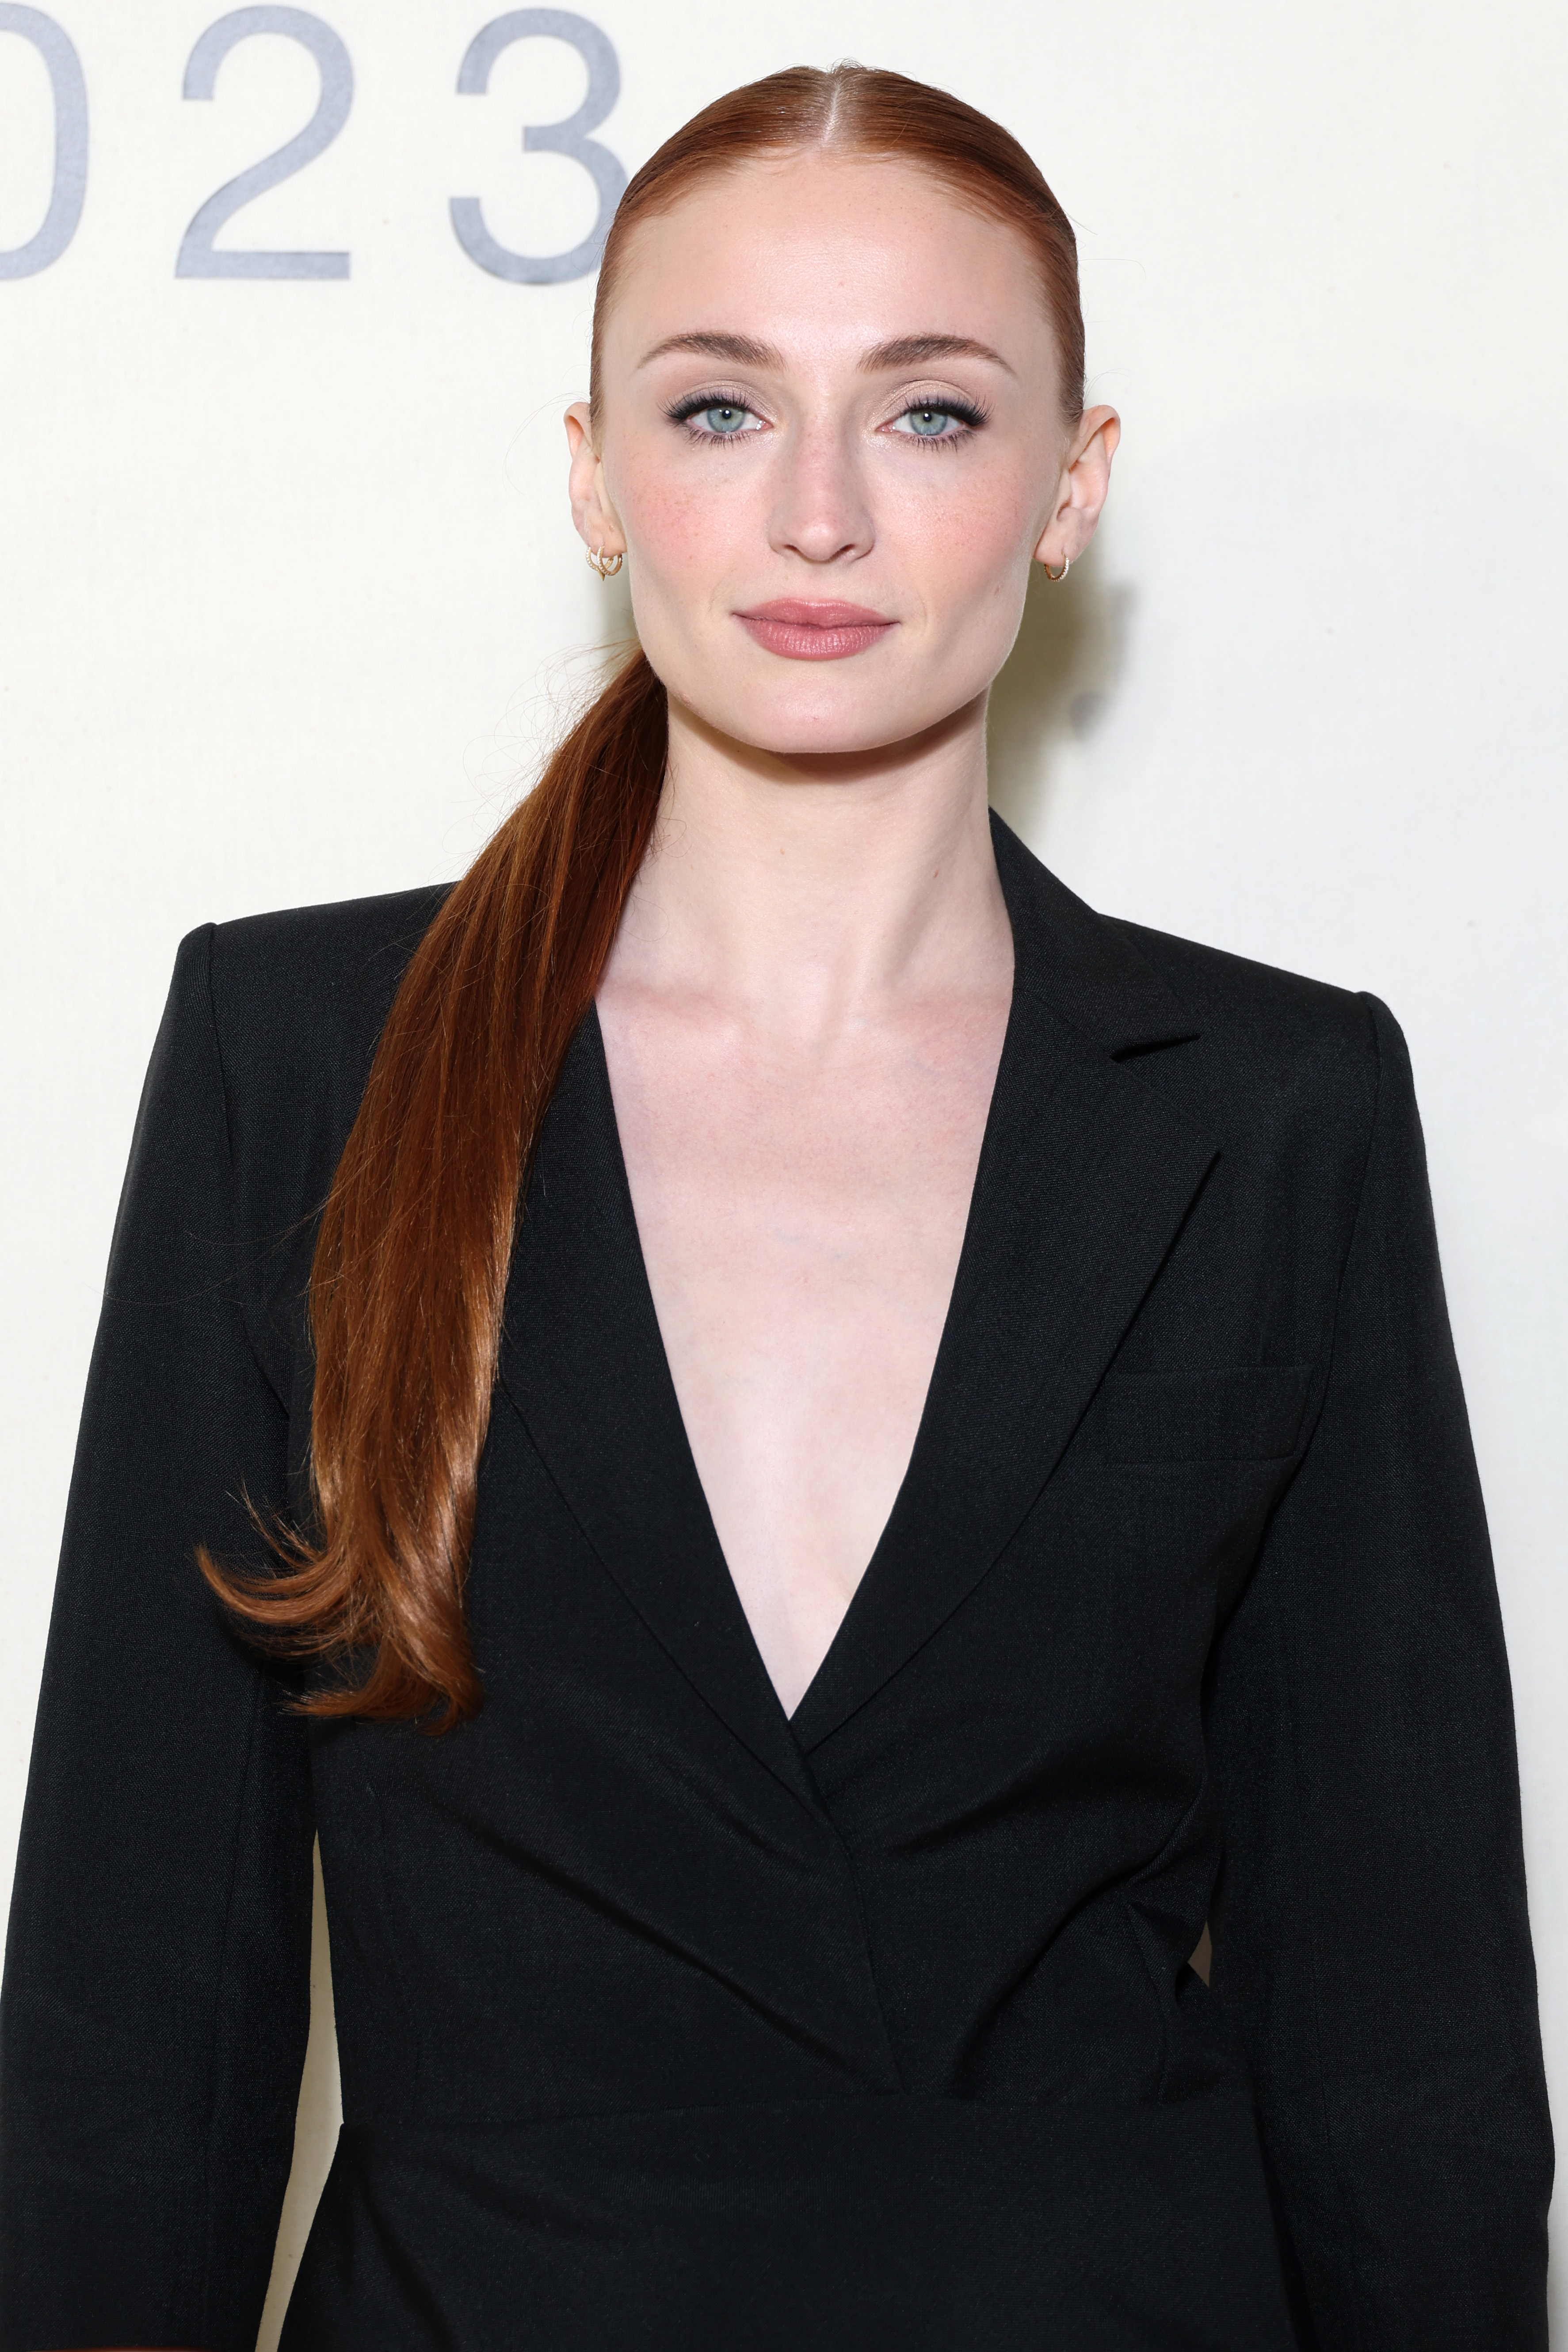 Sophie wearing a suit jacket at a media event